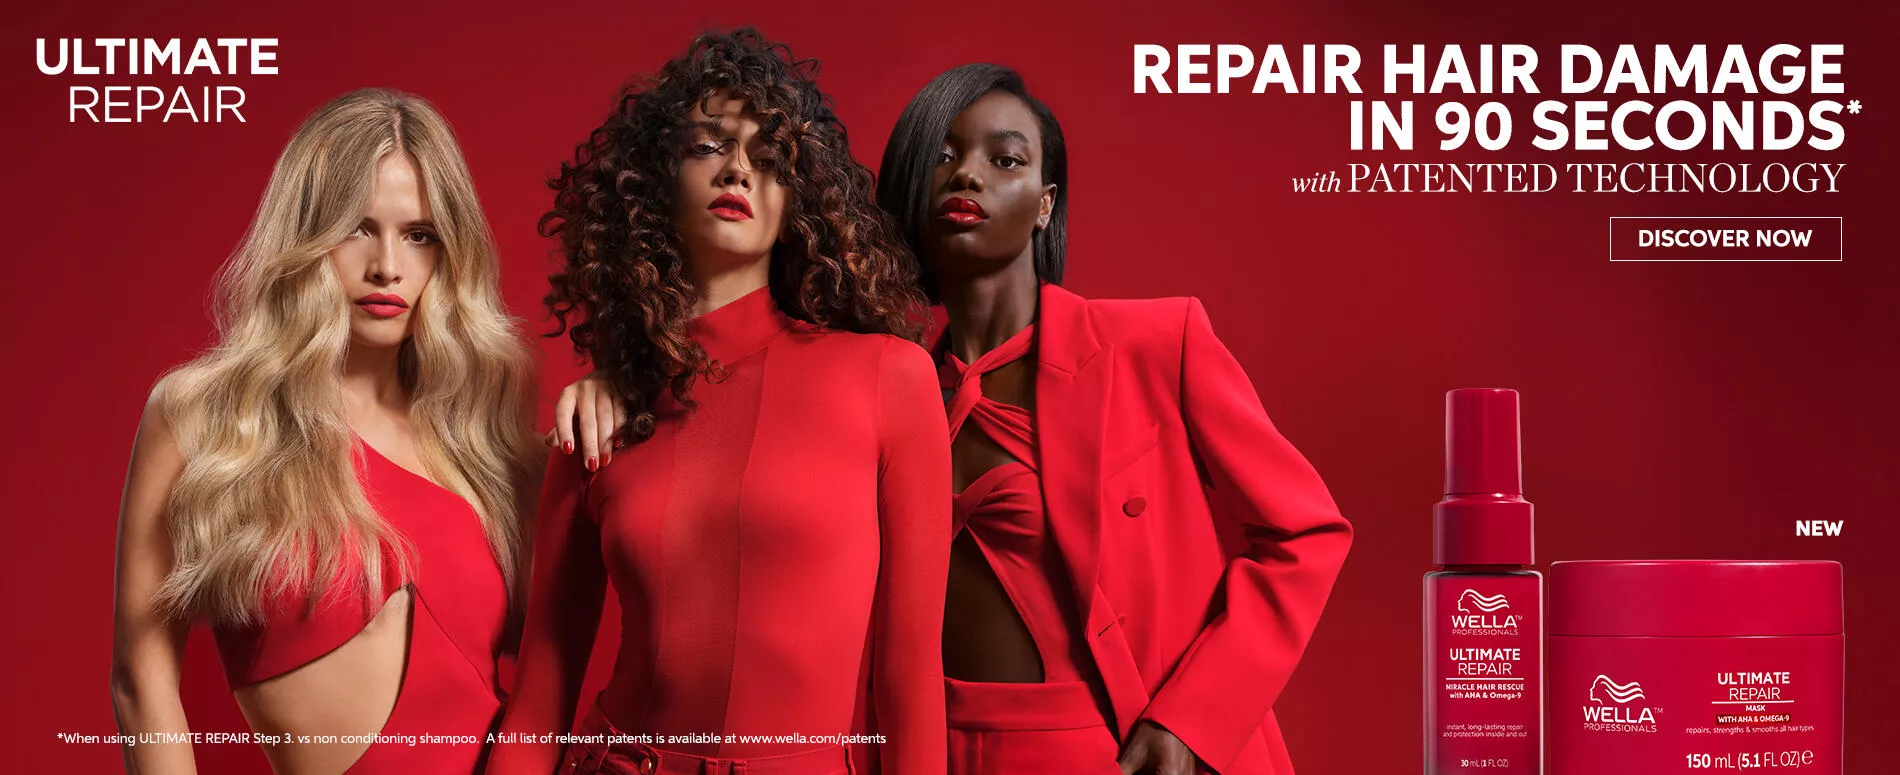 Image of 3 models wearing red beside the a red bottle of Ultimate Repair Mask for damaged hair by Wella Professionals